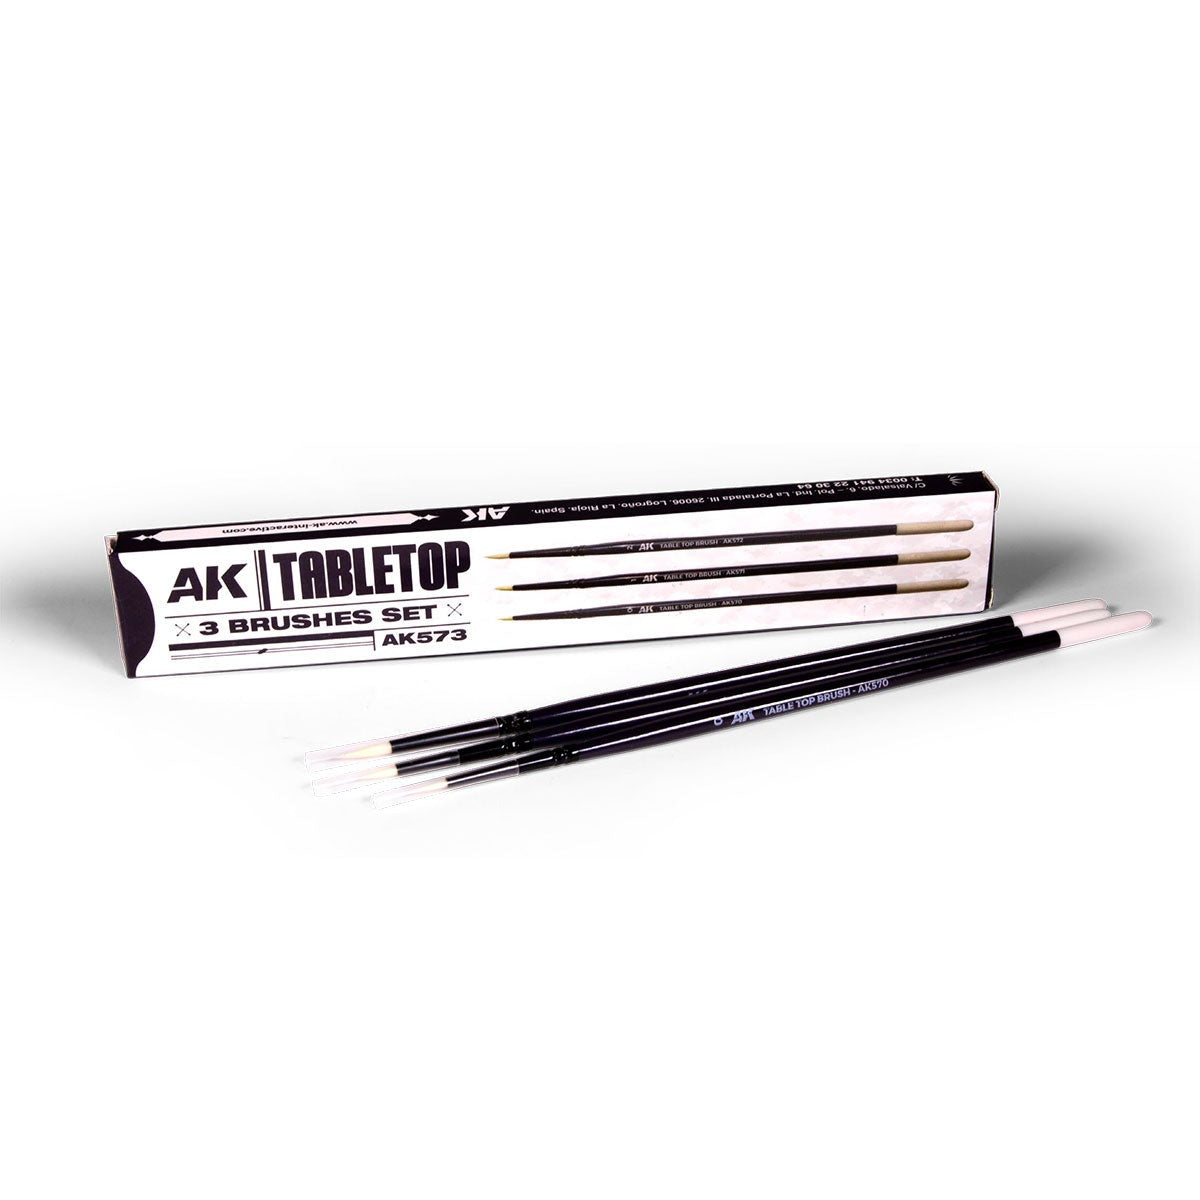 AK Interactive Table Top Brushes Set 0,1,2 AK573 - Loaded Dice Barry Vale of Glamorgan CF64 3HD